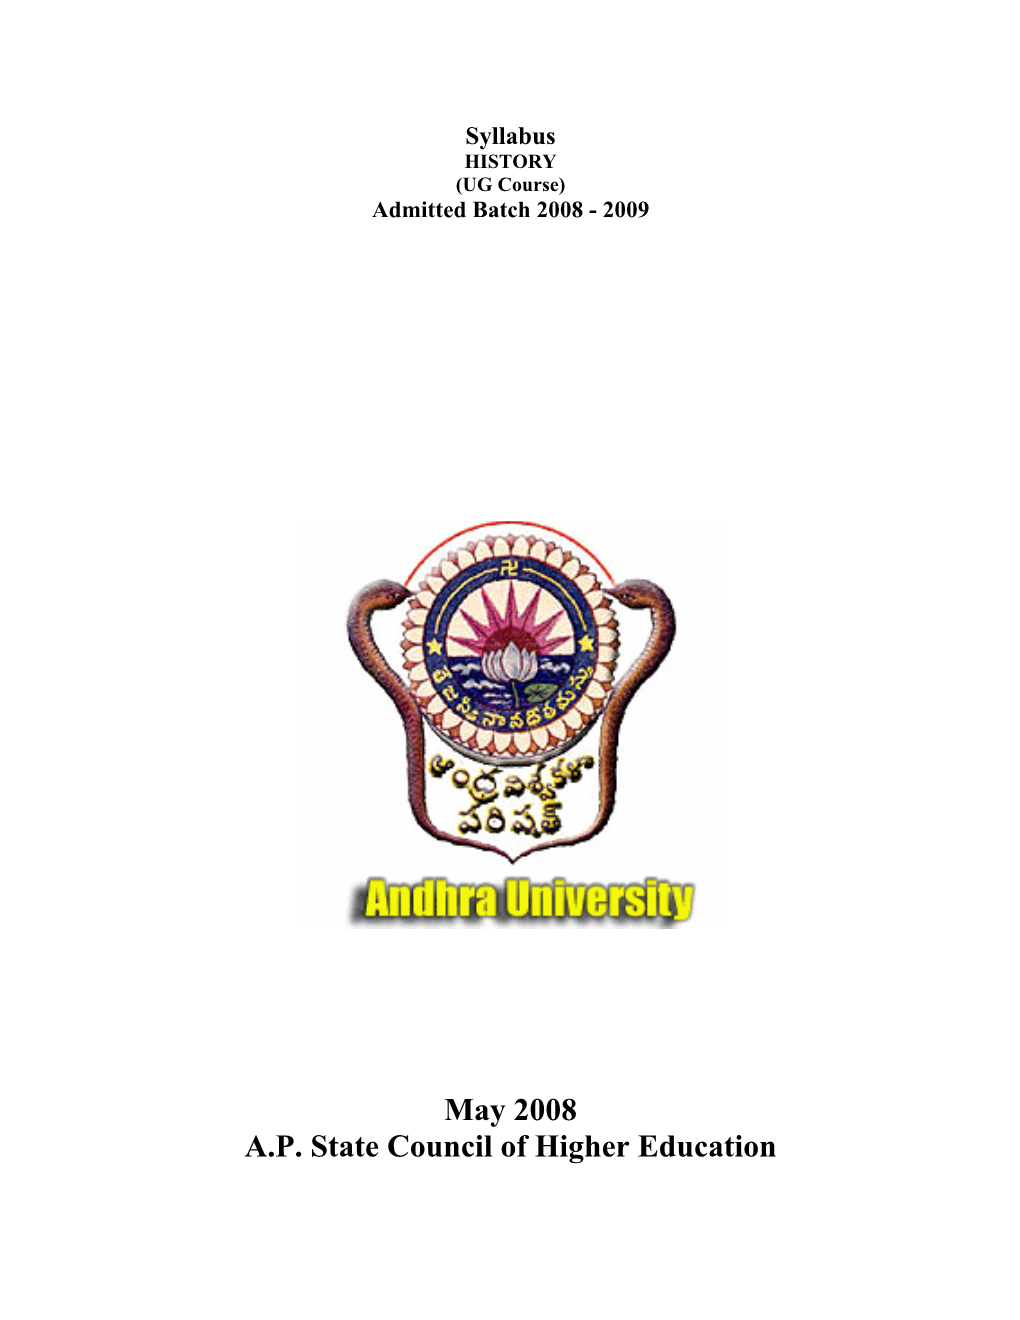 Syllabus HISTORY (UG Course) Admitted Batch 2008 - 2009